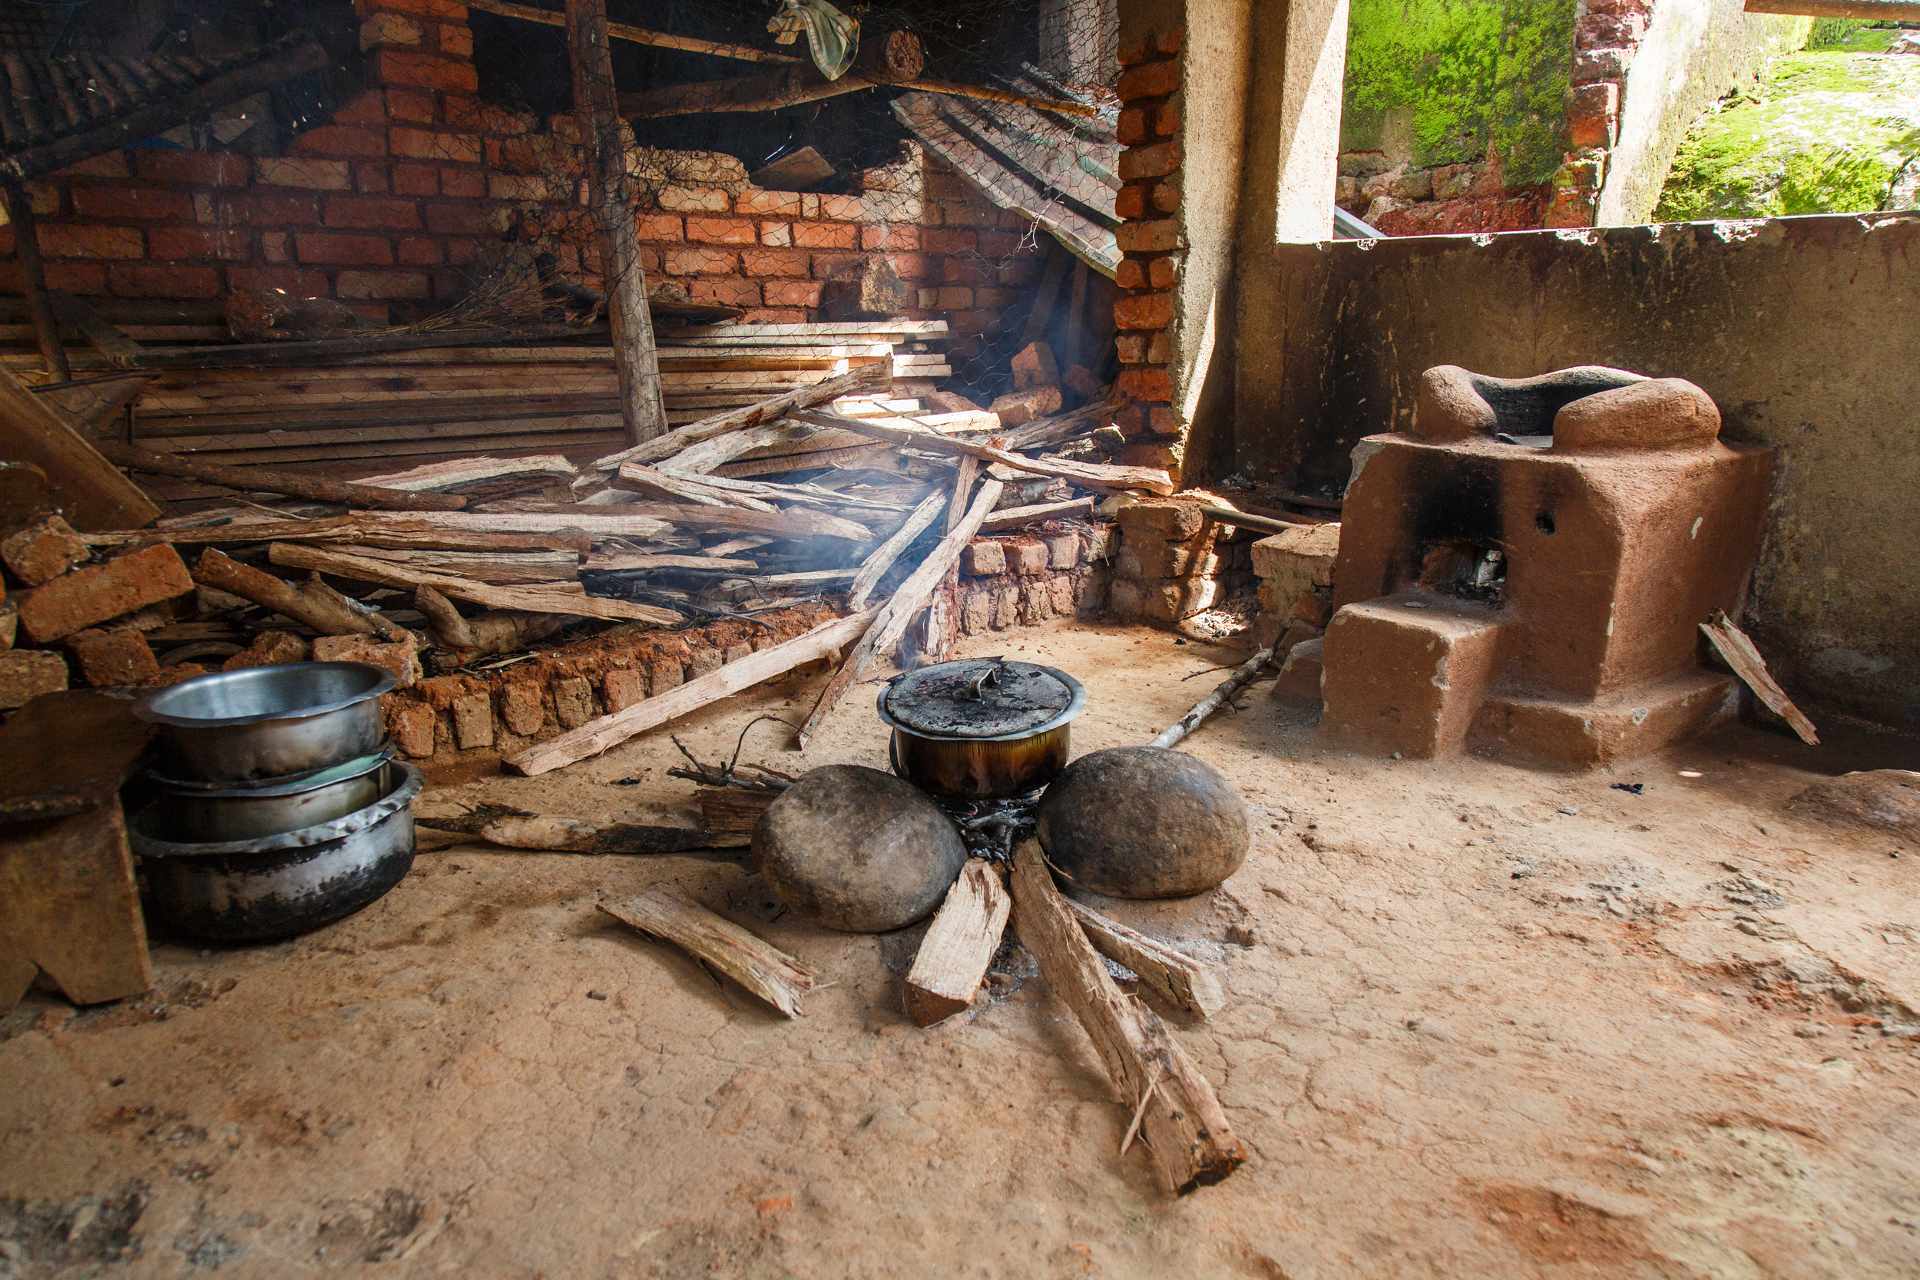 Three Billion People Cook Over Open Fires ― With Deadly Consequences